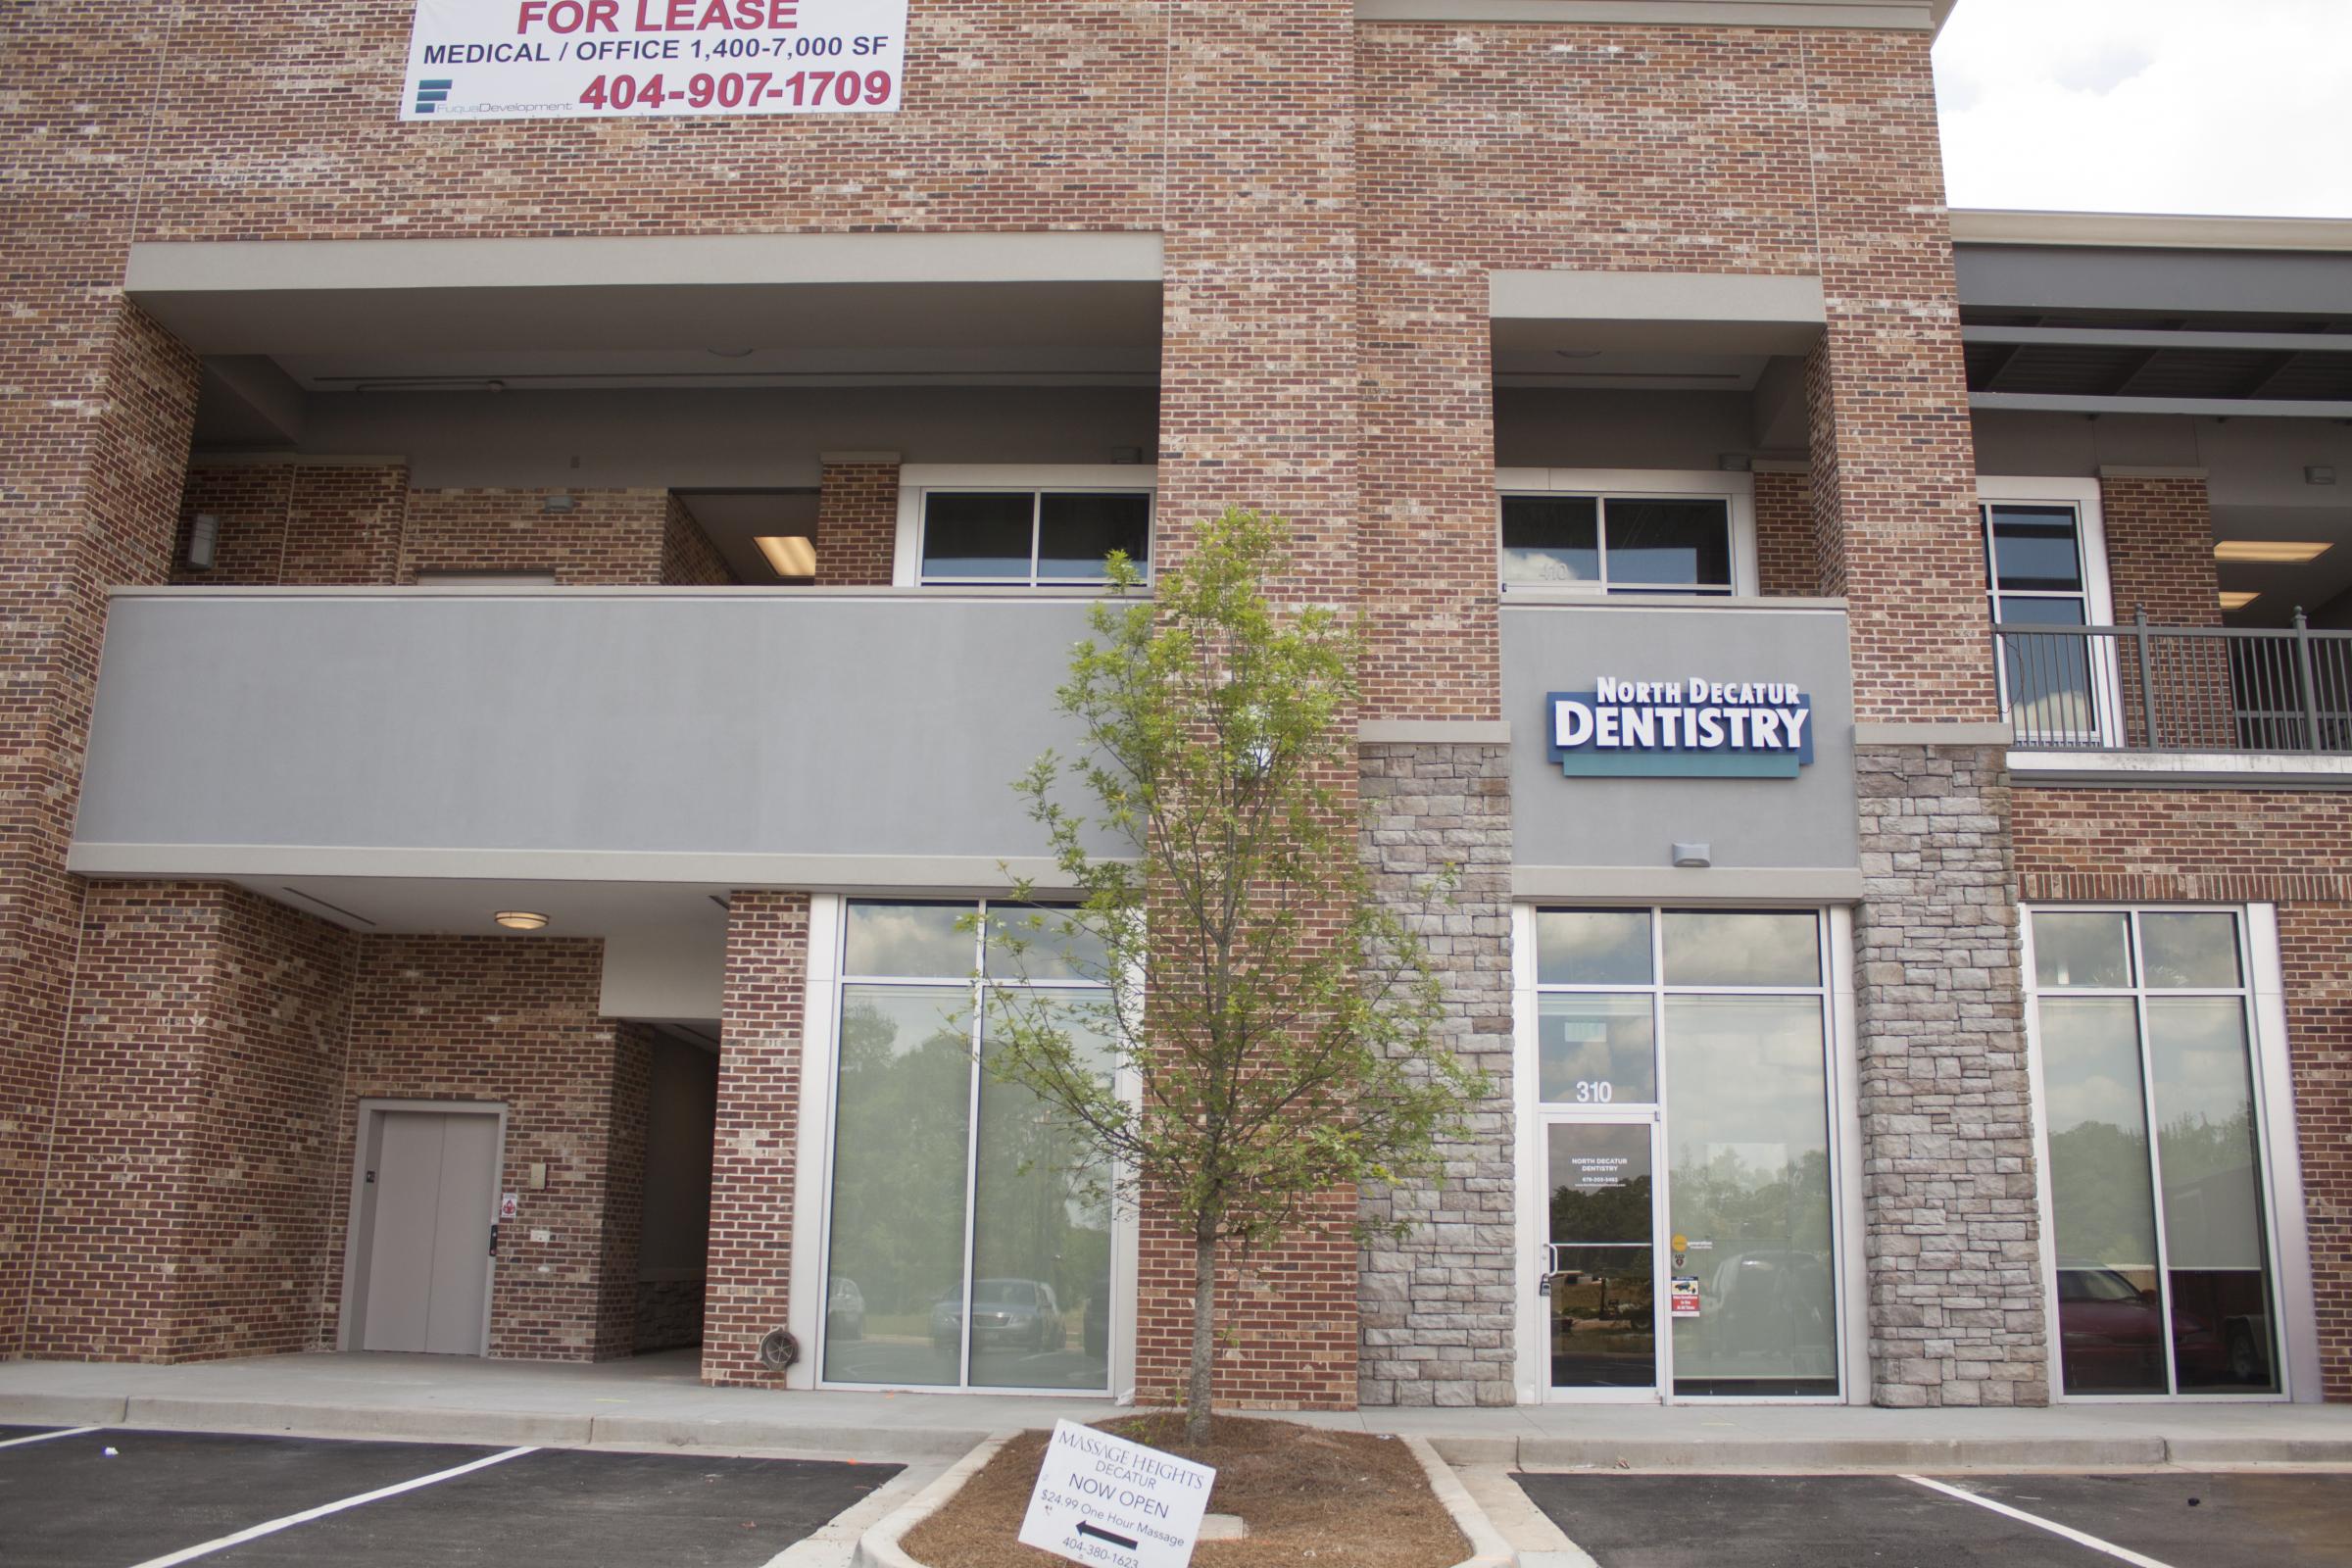 North Decatur Dentistry Photo